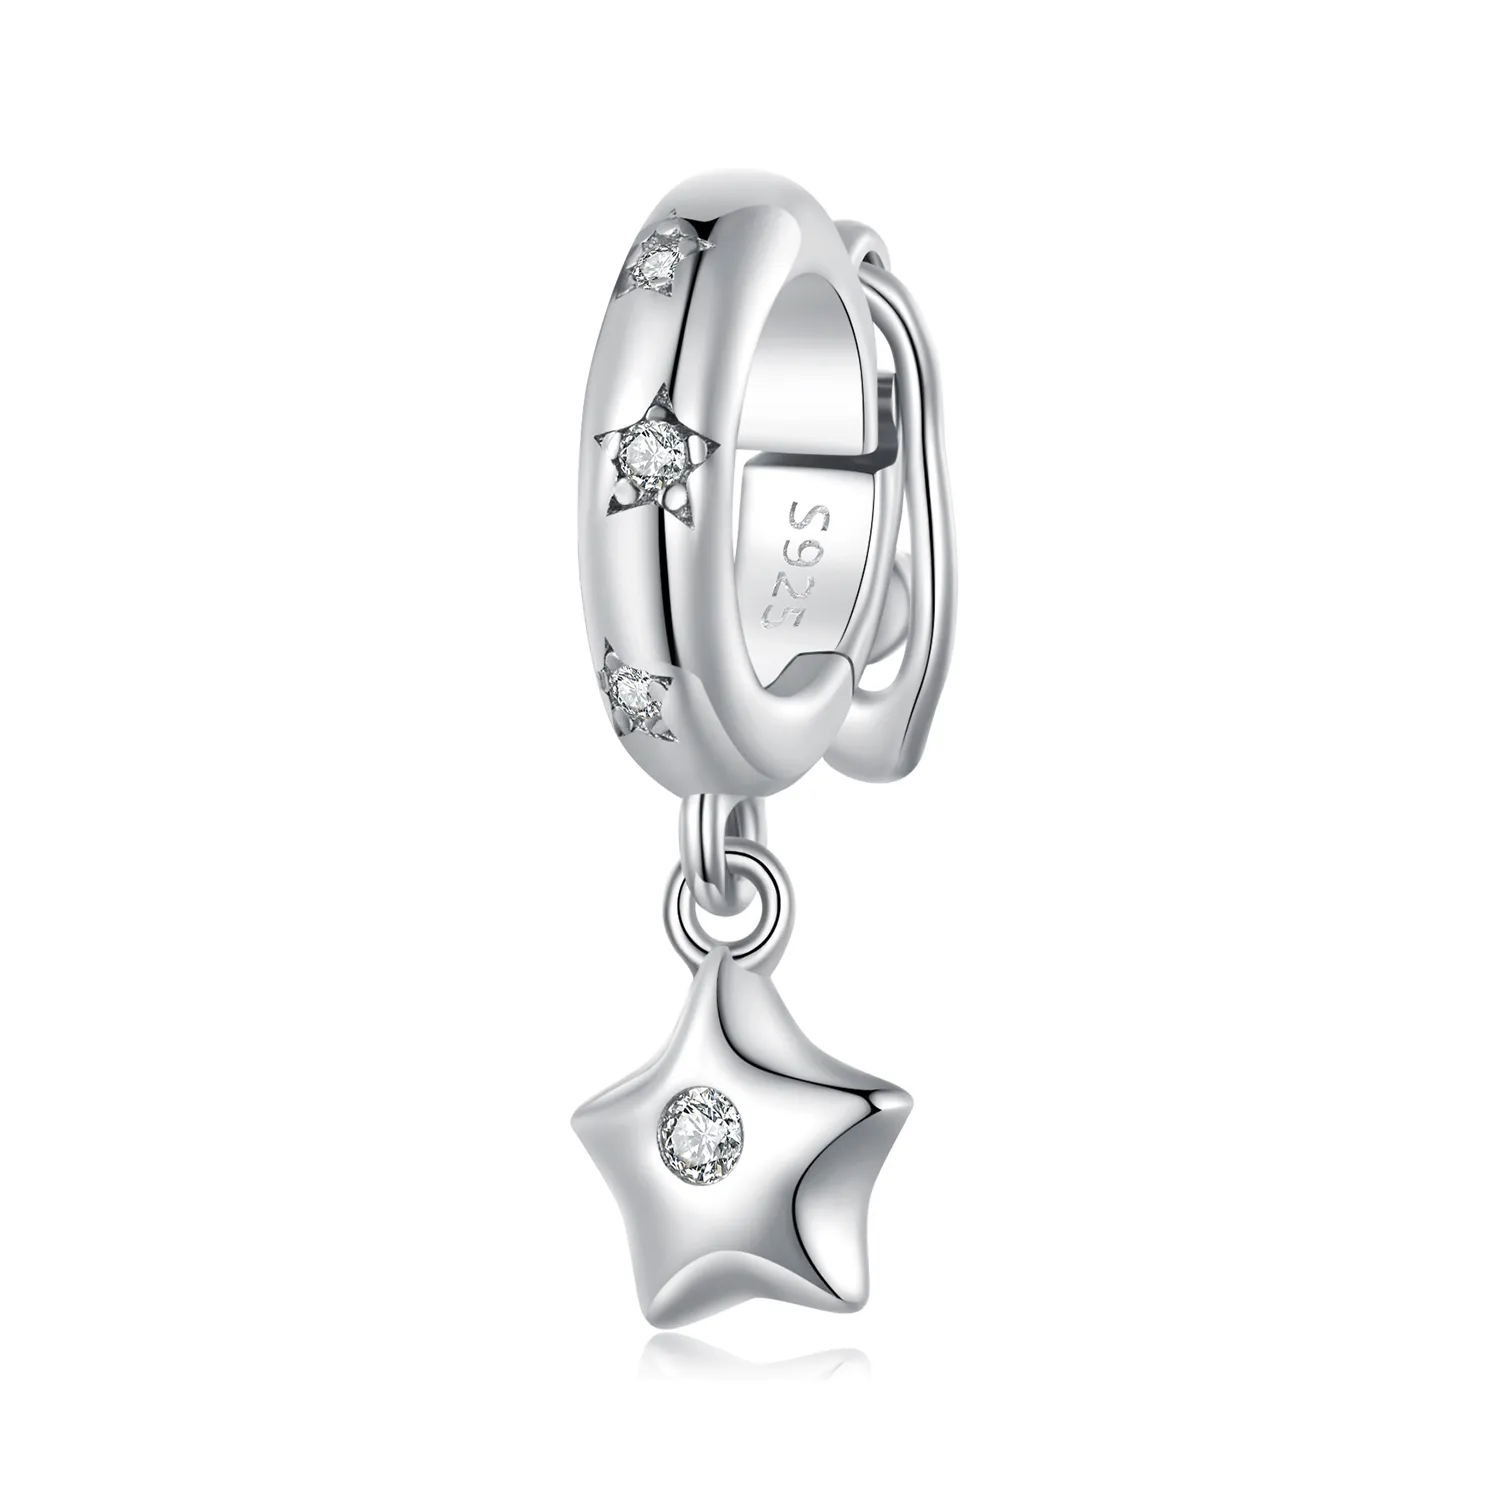 Pandora Style Star Universal Buckle Spacer - BSC889